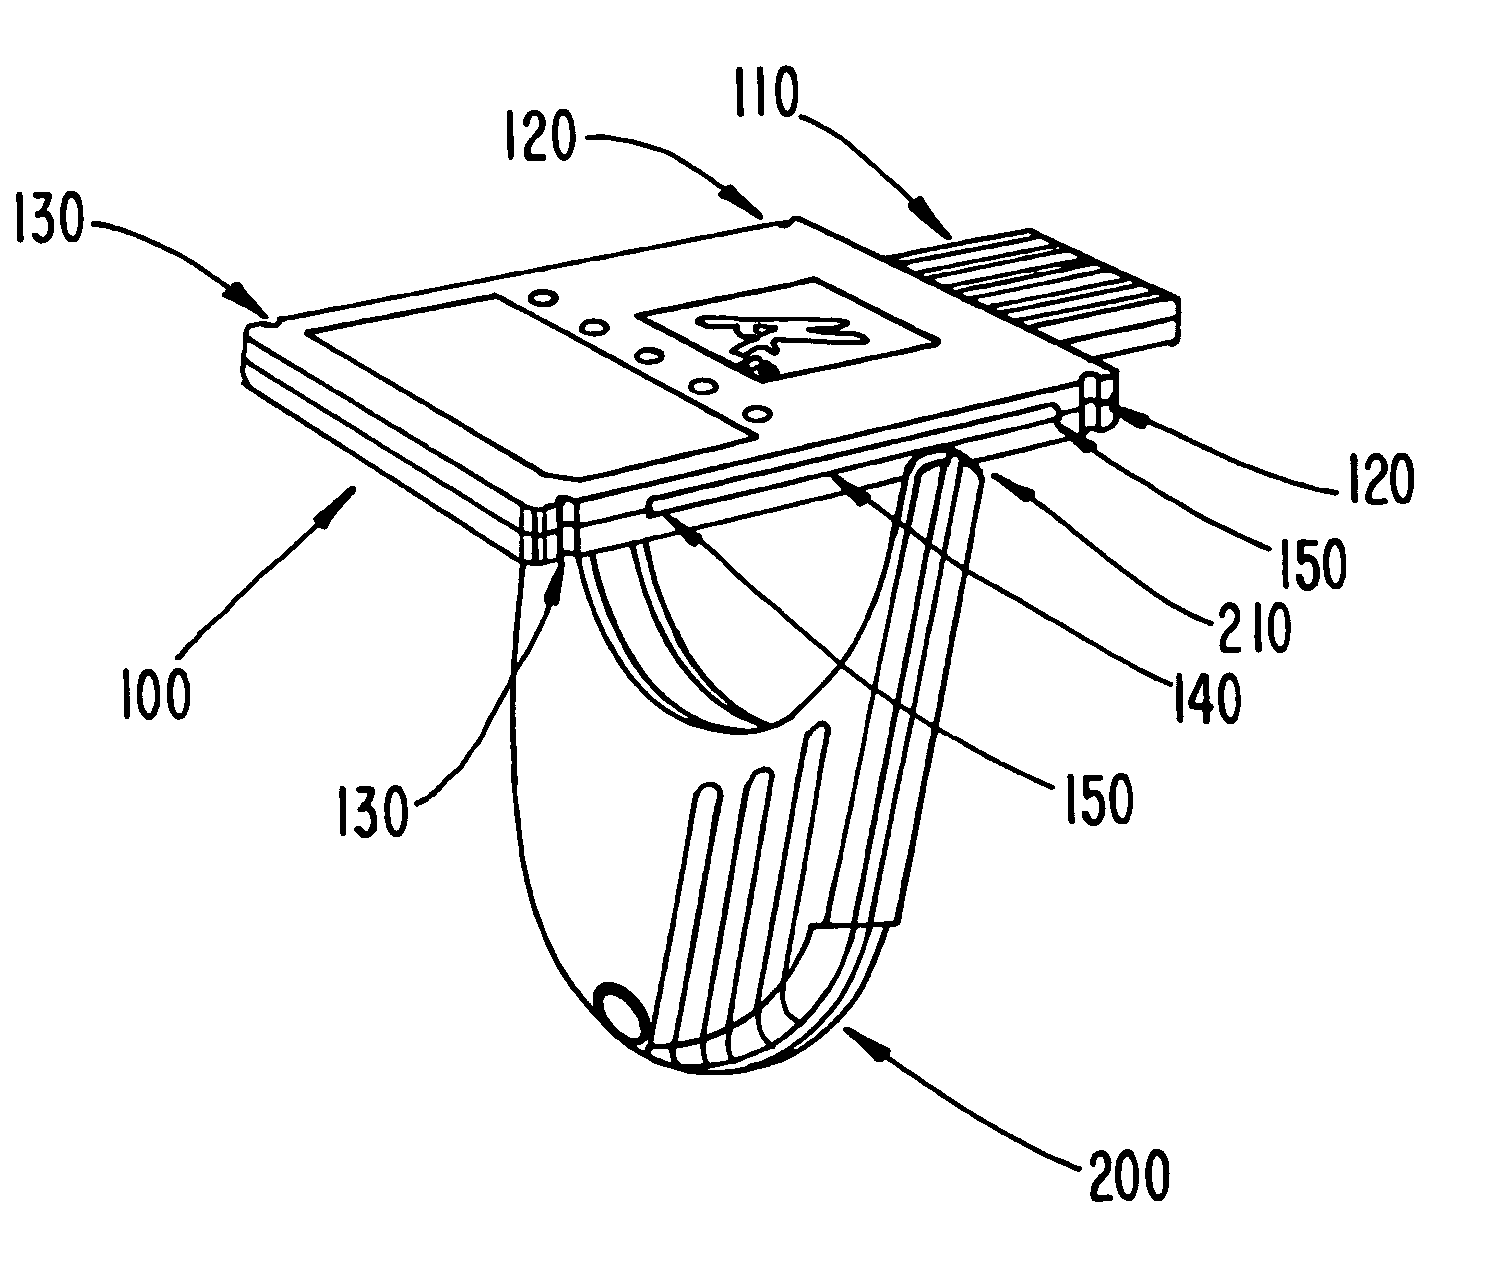 USB storage device including USB plug with top and bottom terminals